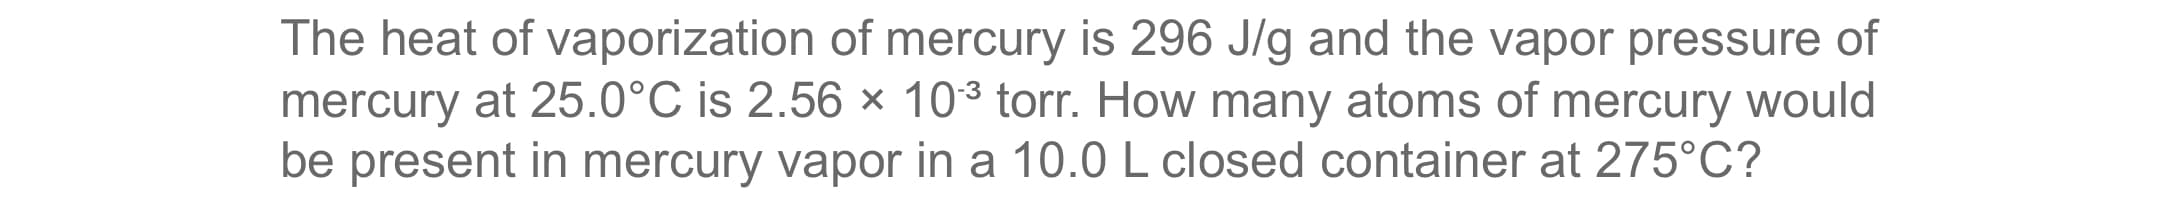 The heat of vaporization of mercury is 296 J/g and the vapor pressure of
mercury at 25.0°C is 2.56 × 103 torr. How many atoms of mercury would
be present in mercury vapor in a 10.0 L closed container at 275°C?
